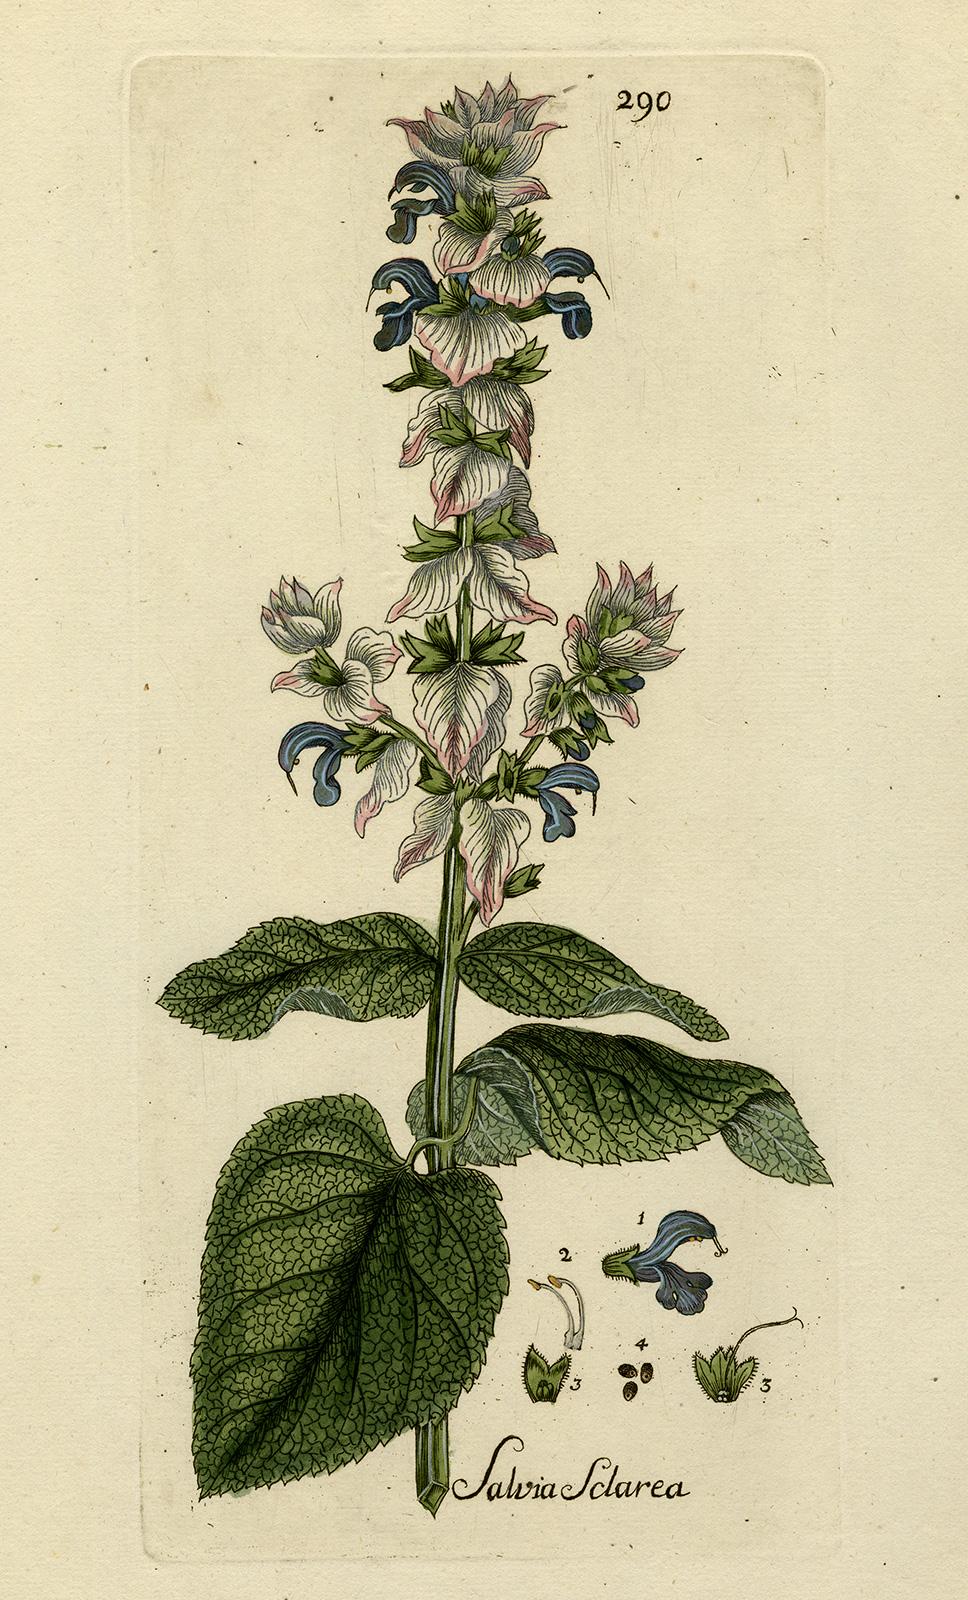 Andreas Friedrich Happe Still-Life Print - Clary Sage from Medicinal Plants by Happe - Handcoloured engraving - 18th c.